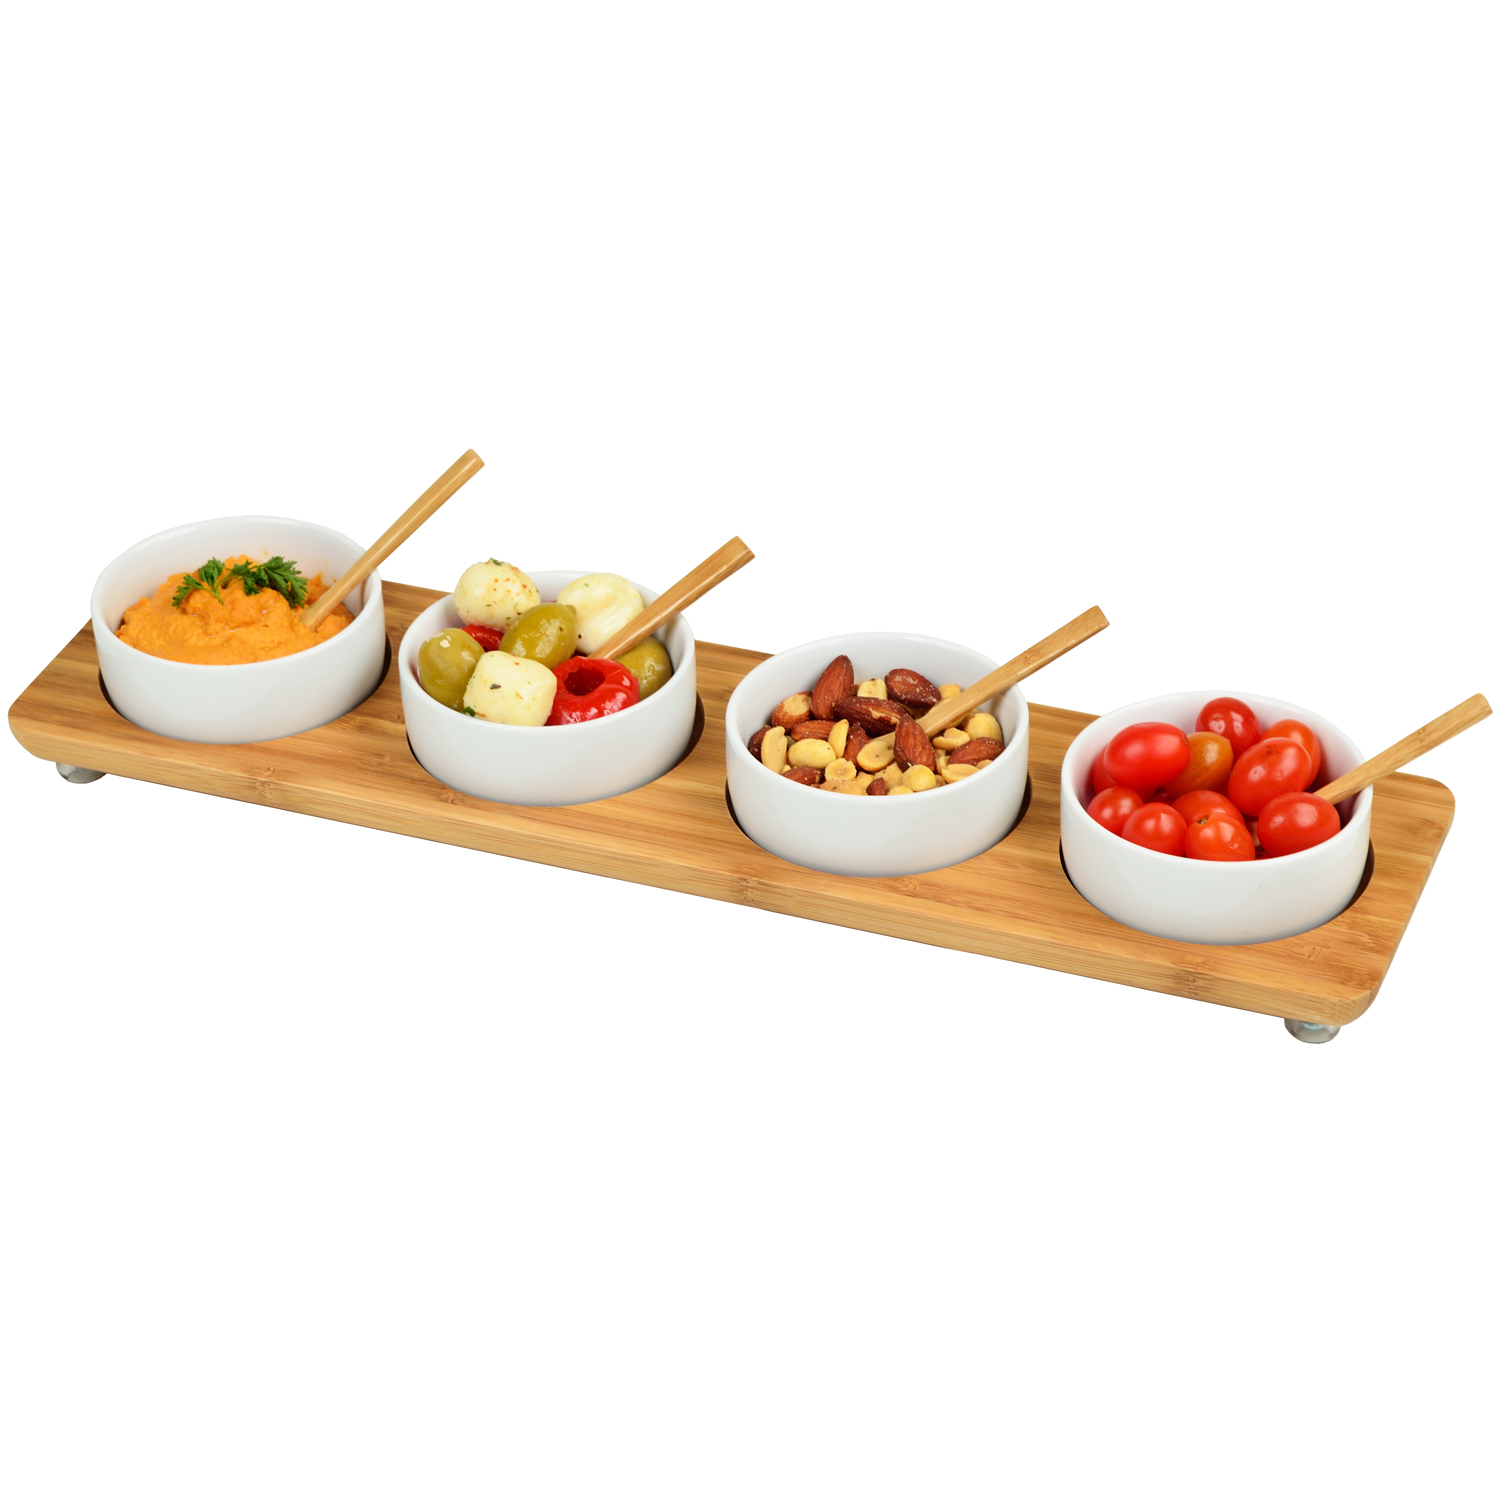 Bamboo Serving Platter with 4 Ceramic Bowls and Bamboo spoons